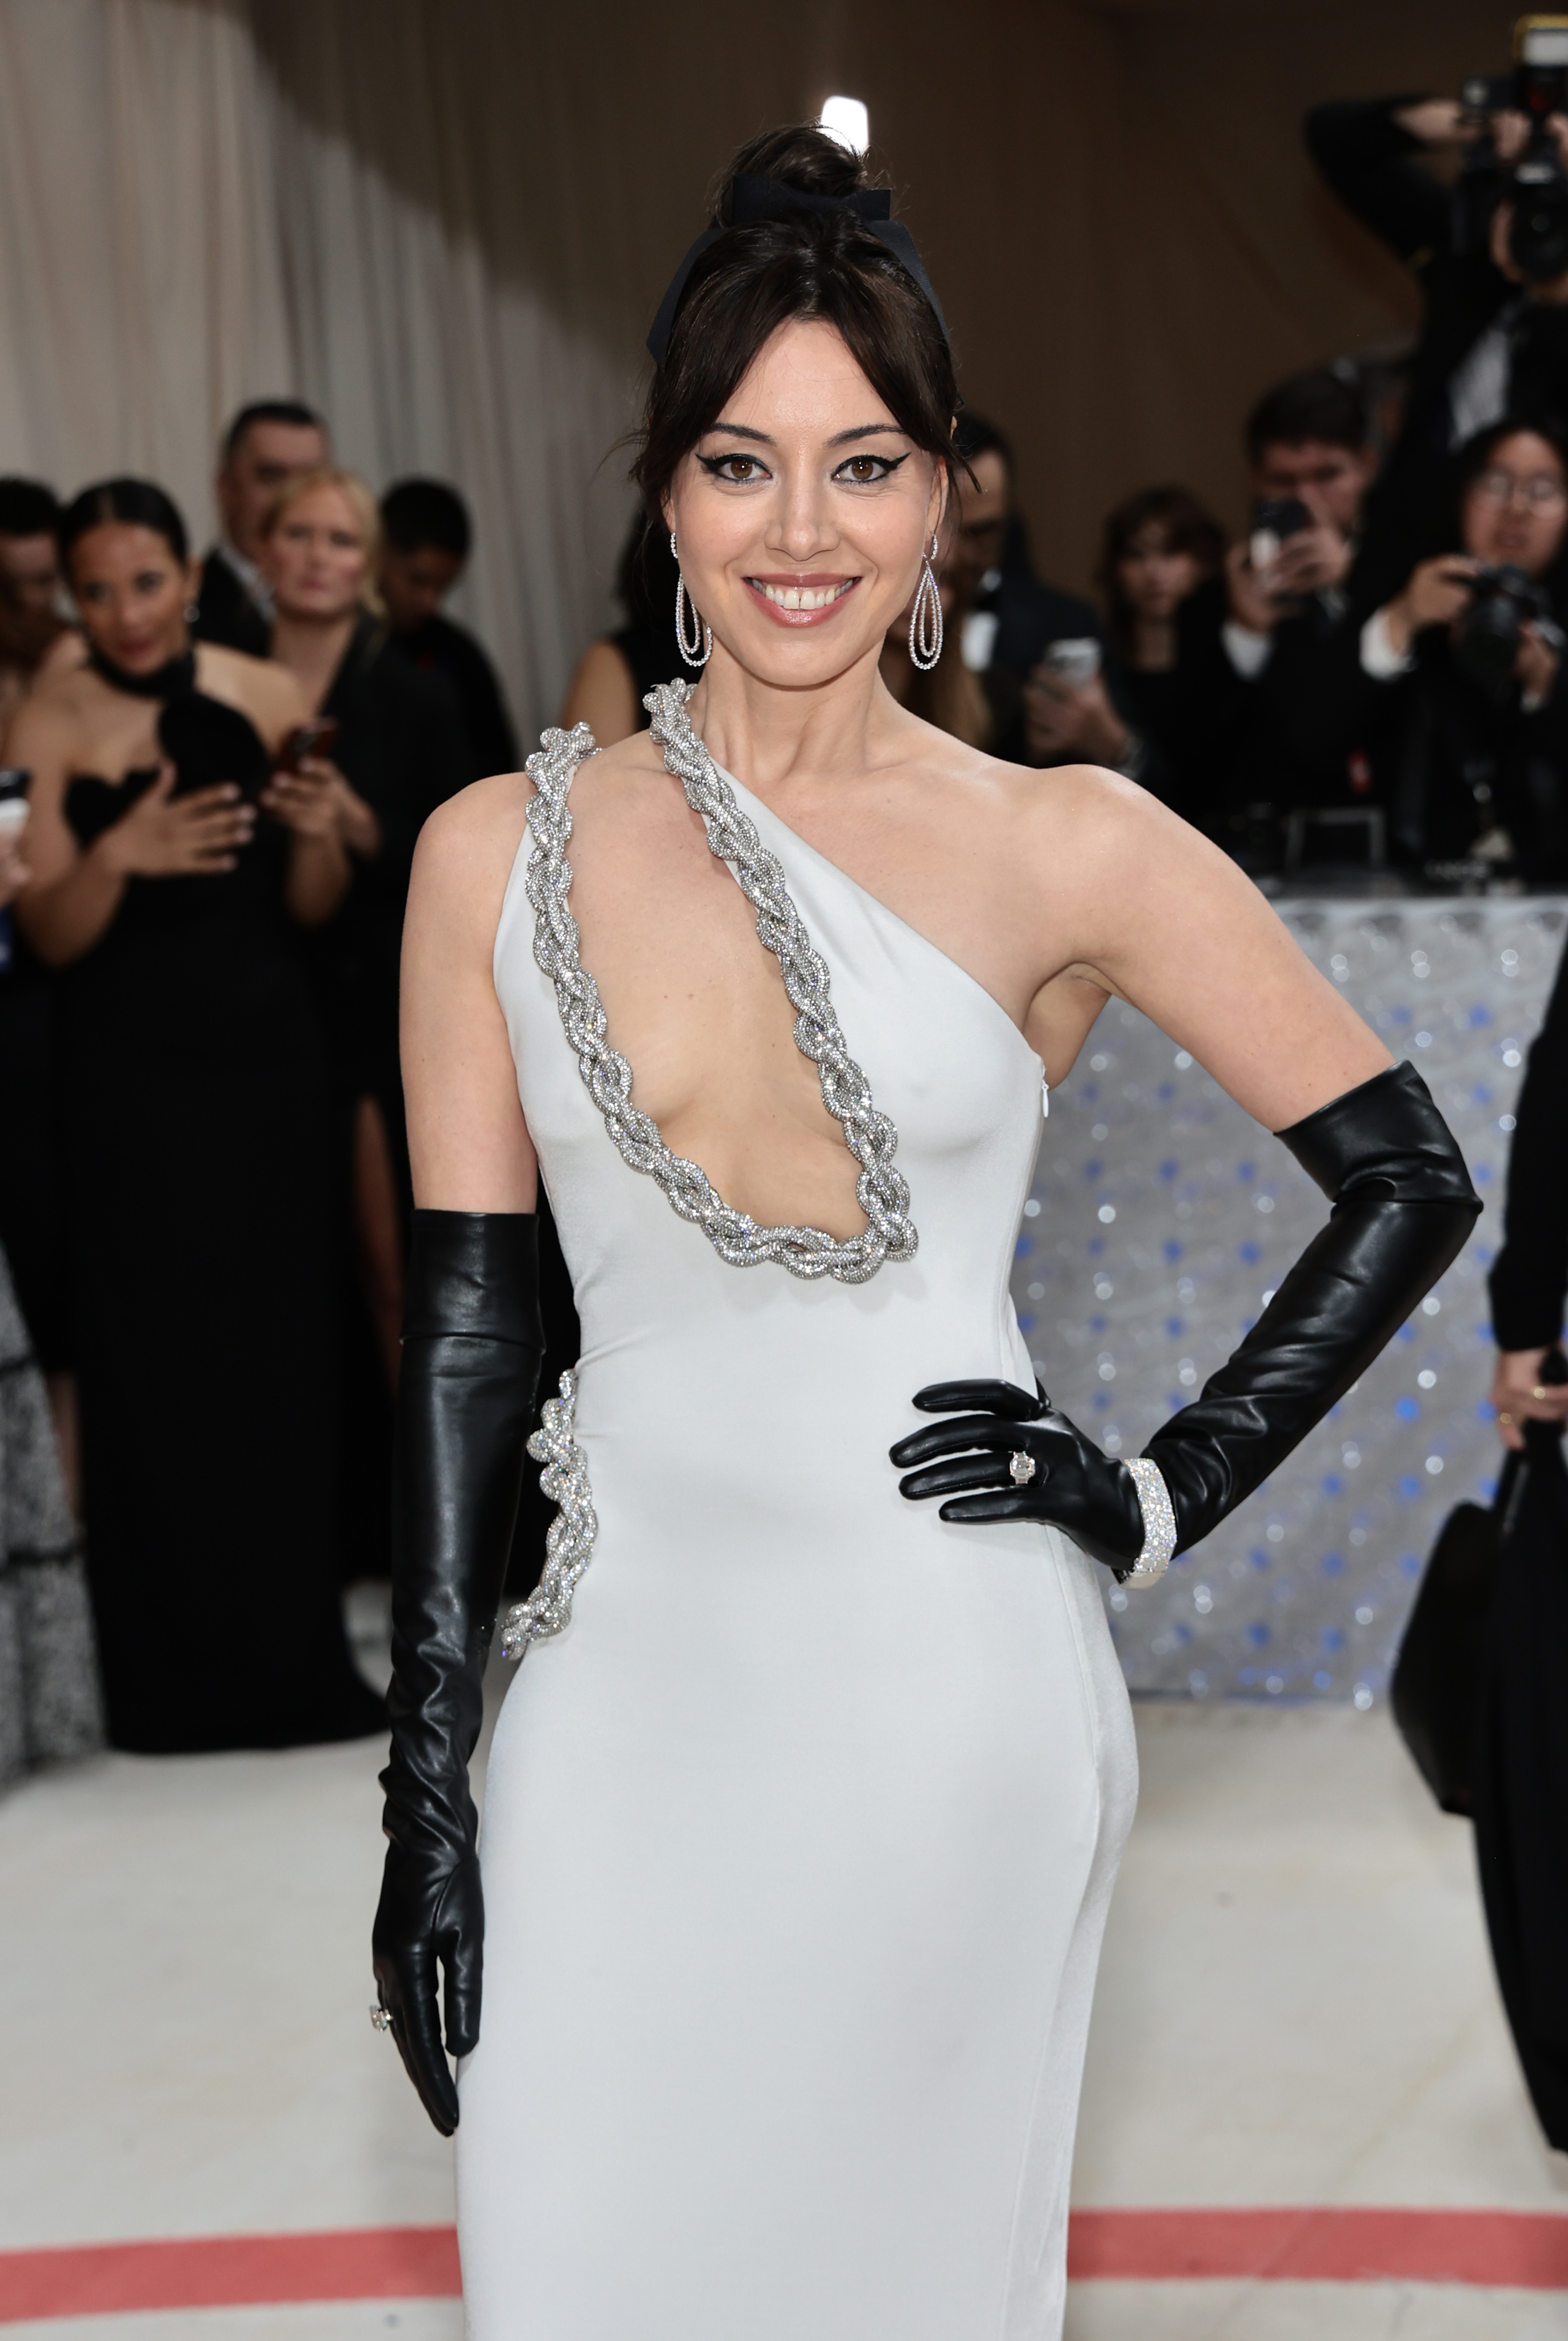 This is not the first time Aubrey Plaza, seen here at the The 2023 Met Gala on May 01, 2023 in New York City, has sustained this injury